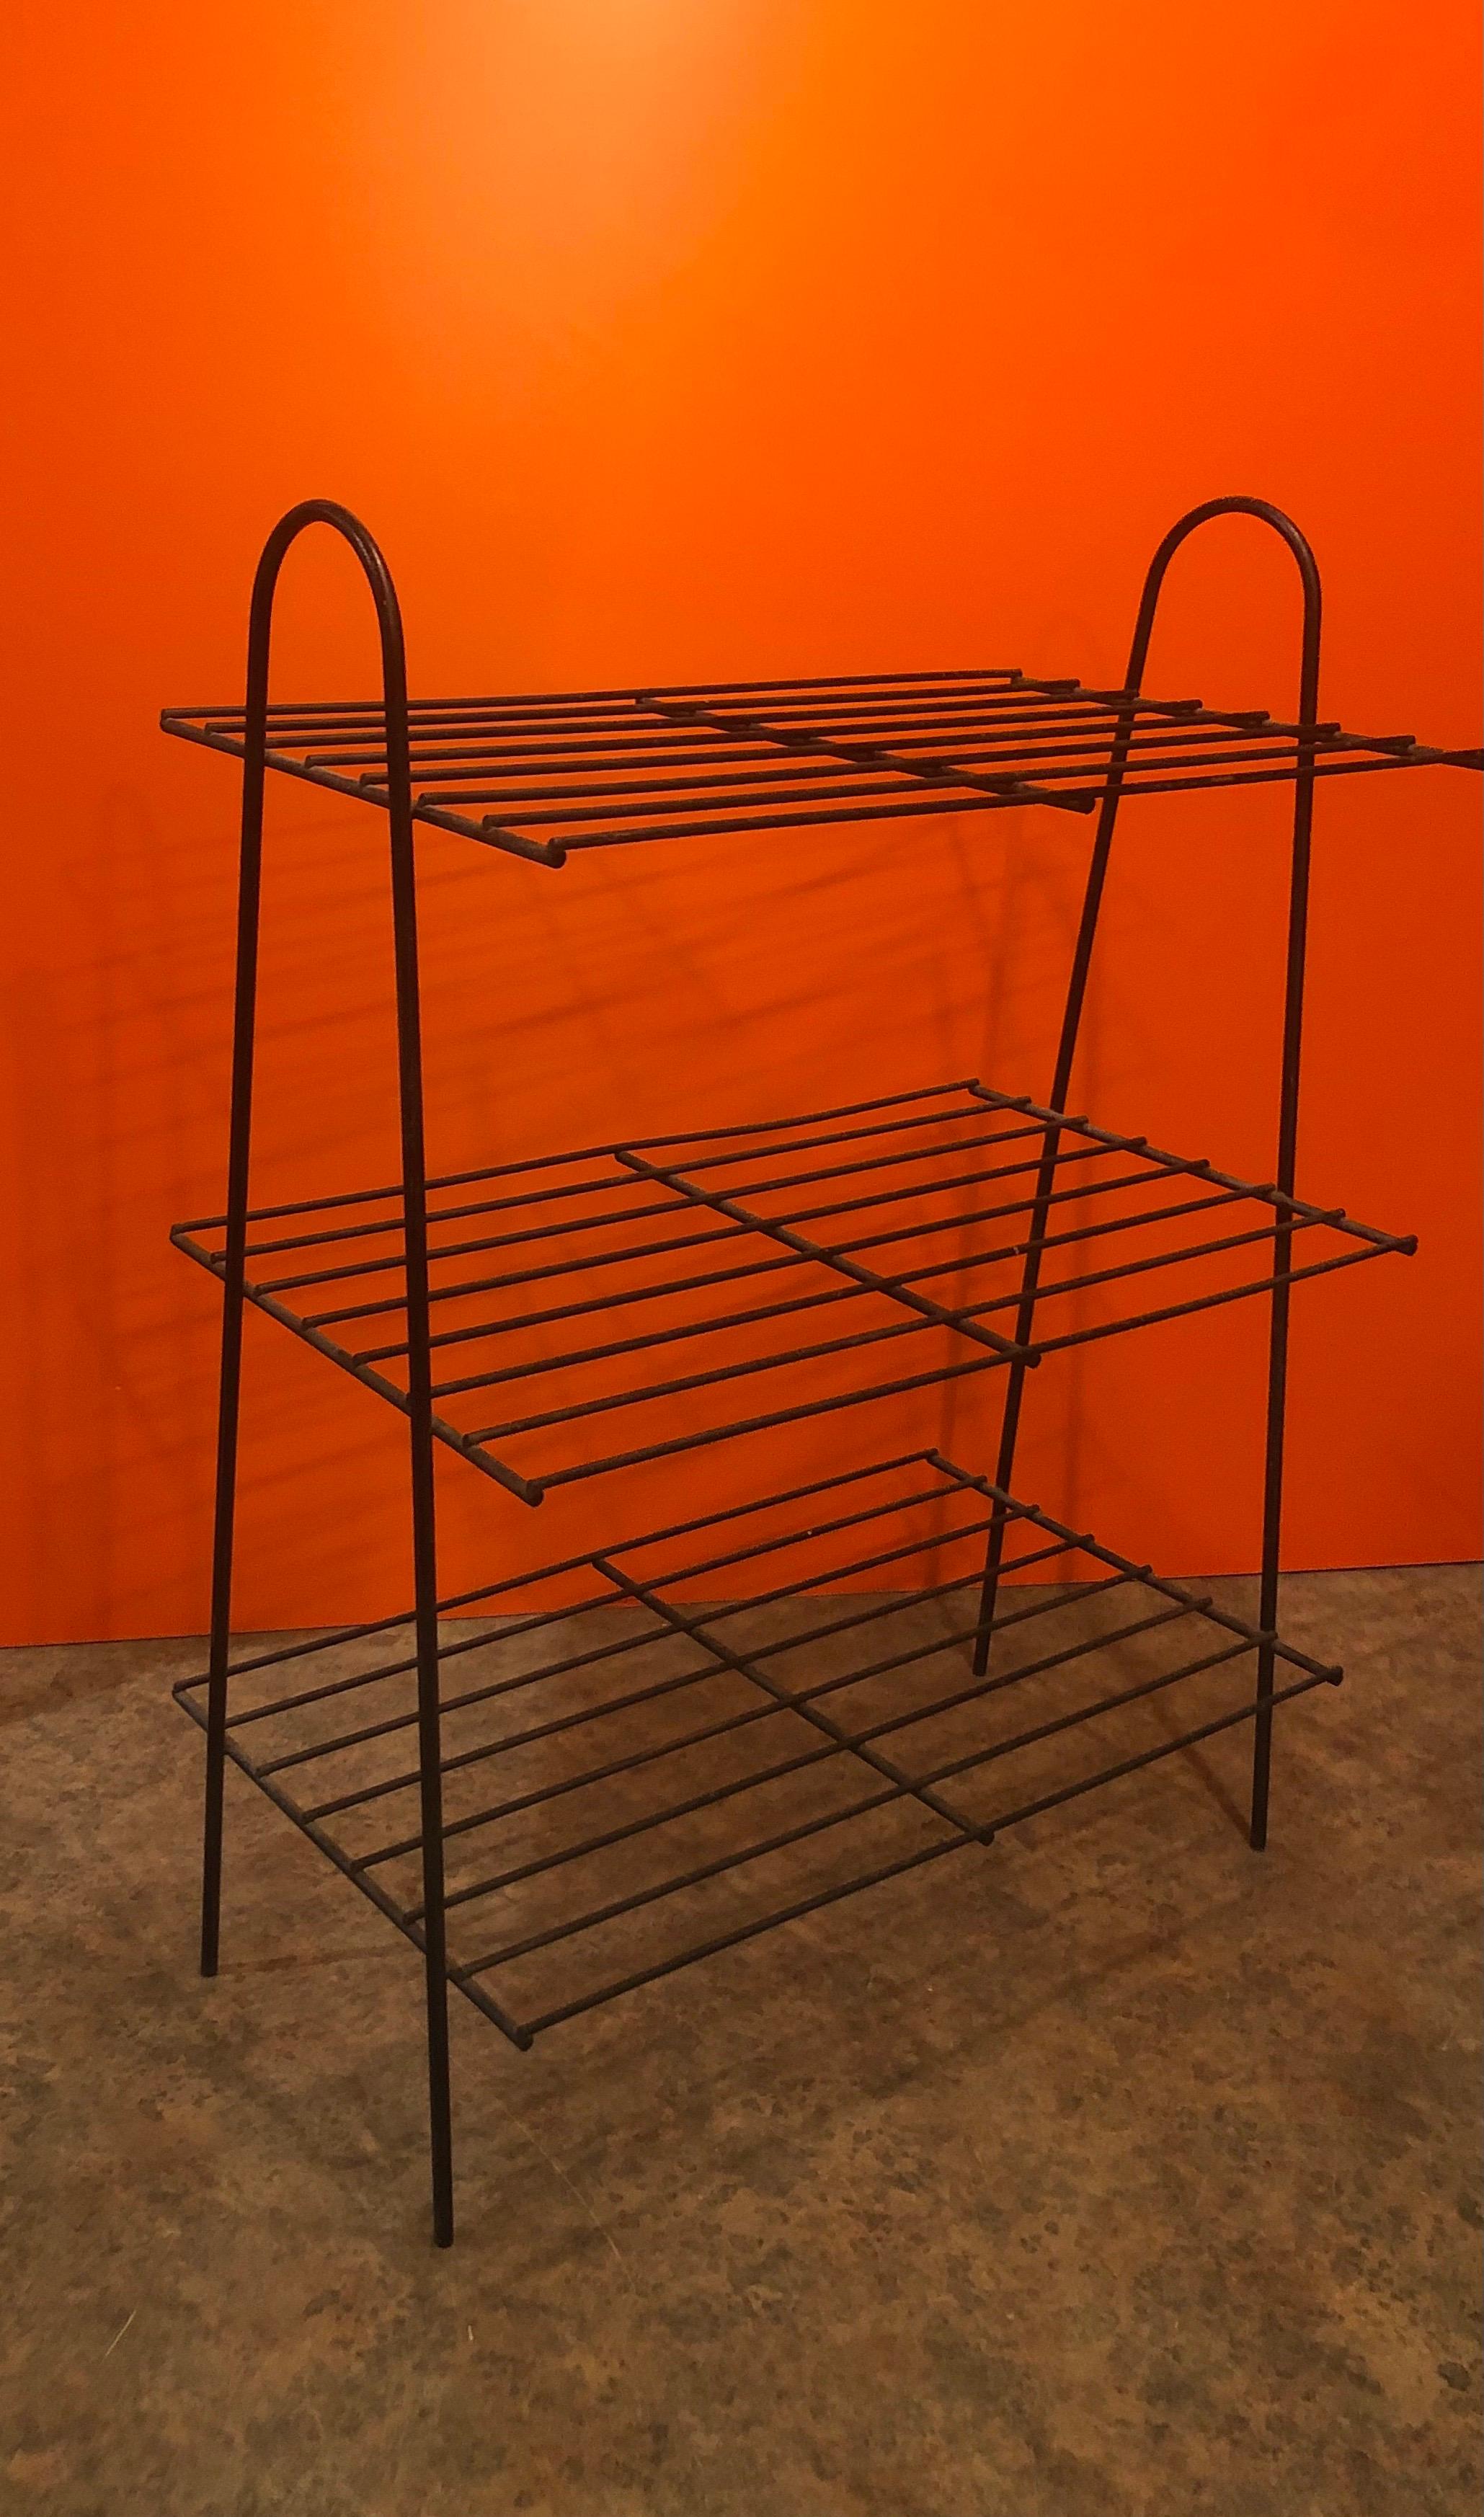 Simple Mid-Century Modern atomic iron wire book shelf or rack, circa 1970s. 

The piece has three shelves and is made of black iron wire and is in good vintage condition with some wear and a great patina. Measurements: 27.5